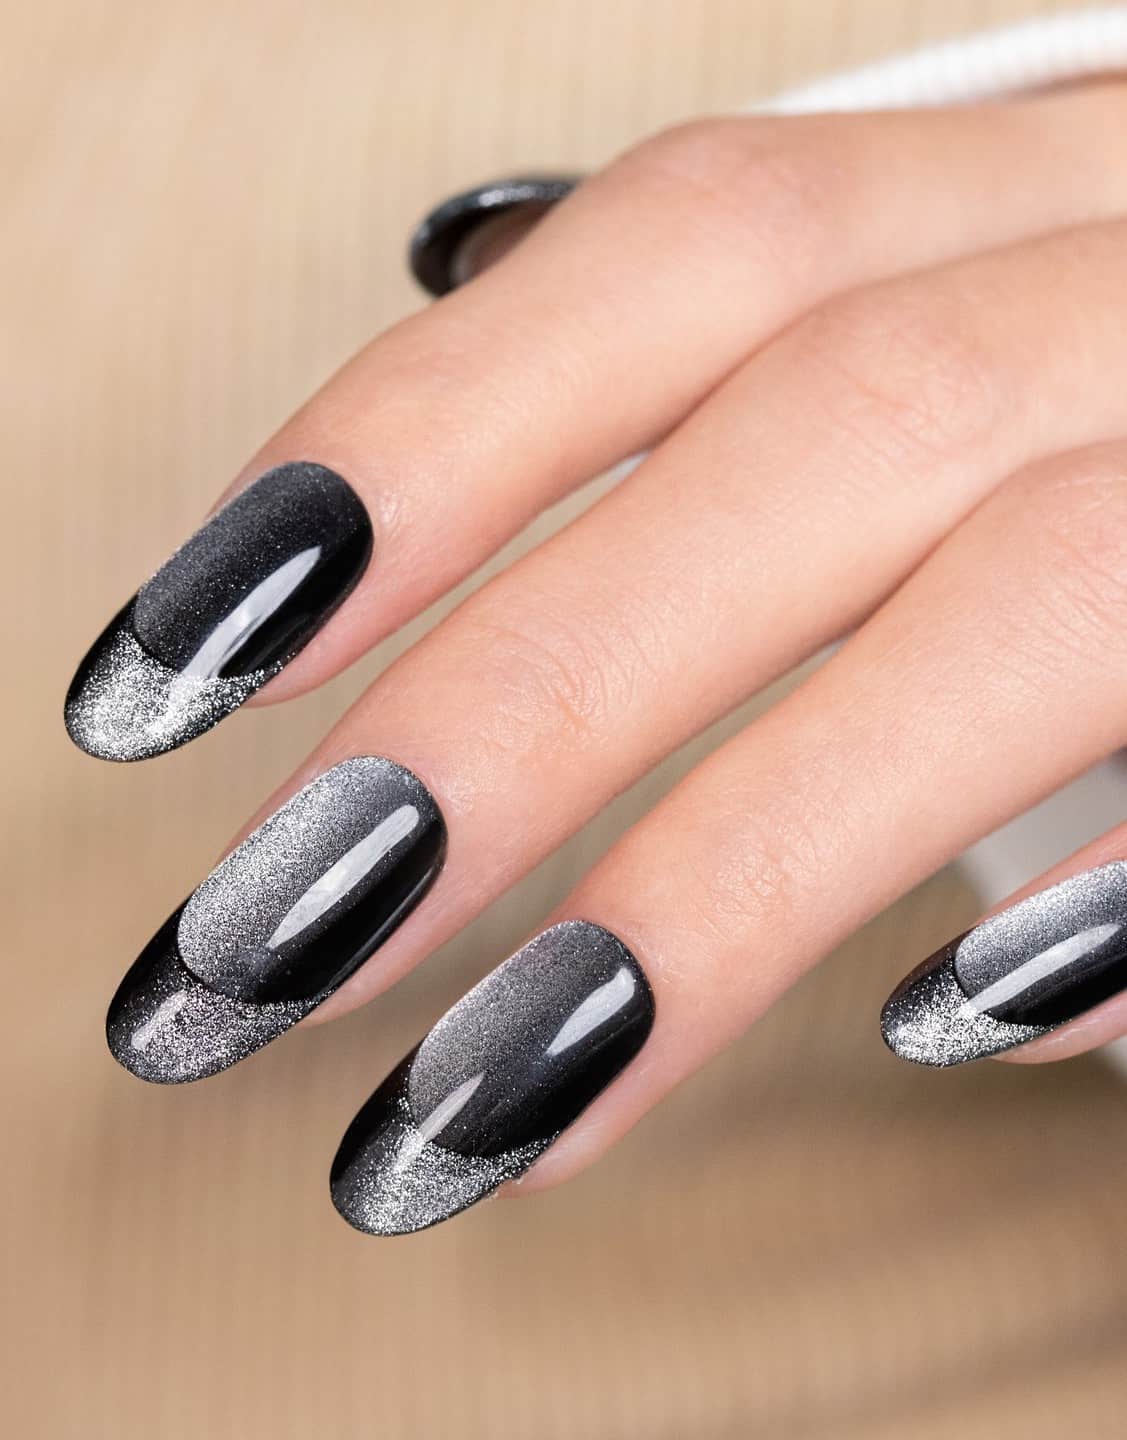 Long black shimmering nails with French tips